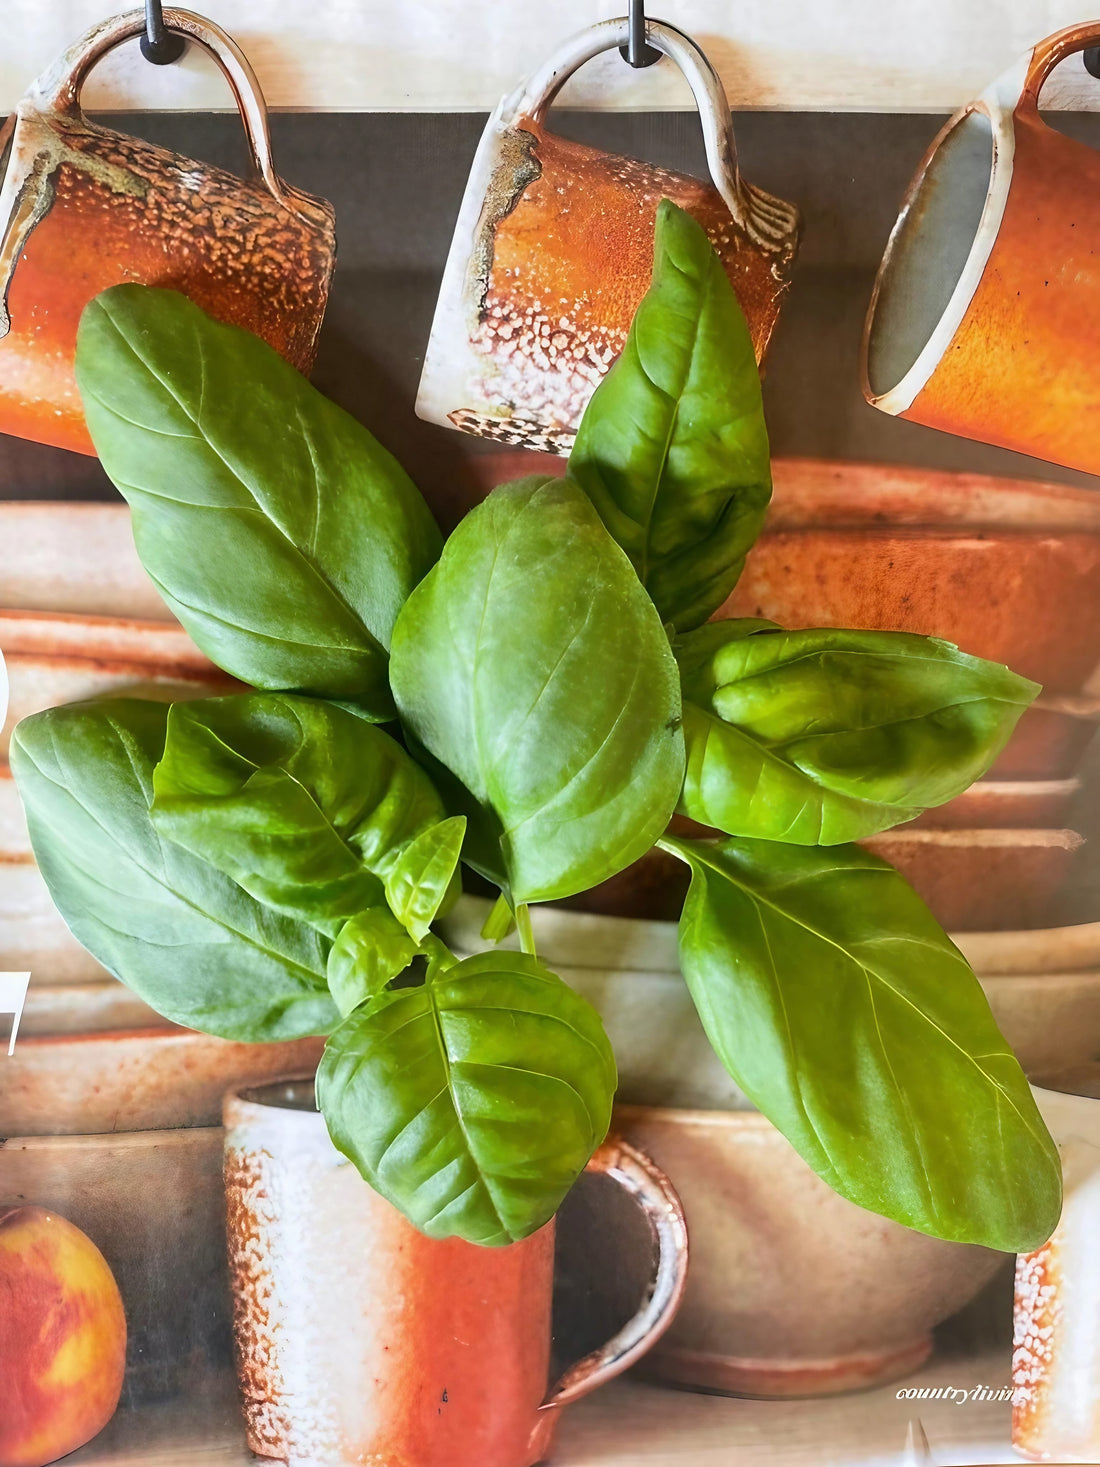 Classic Italian basil plant arranged on a table amidst kitchenware